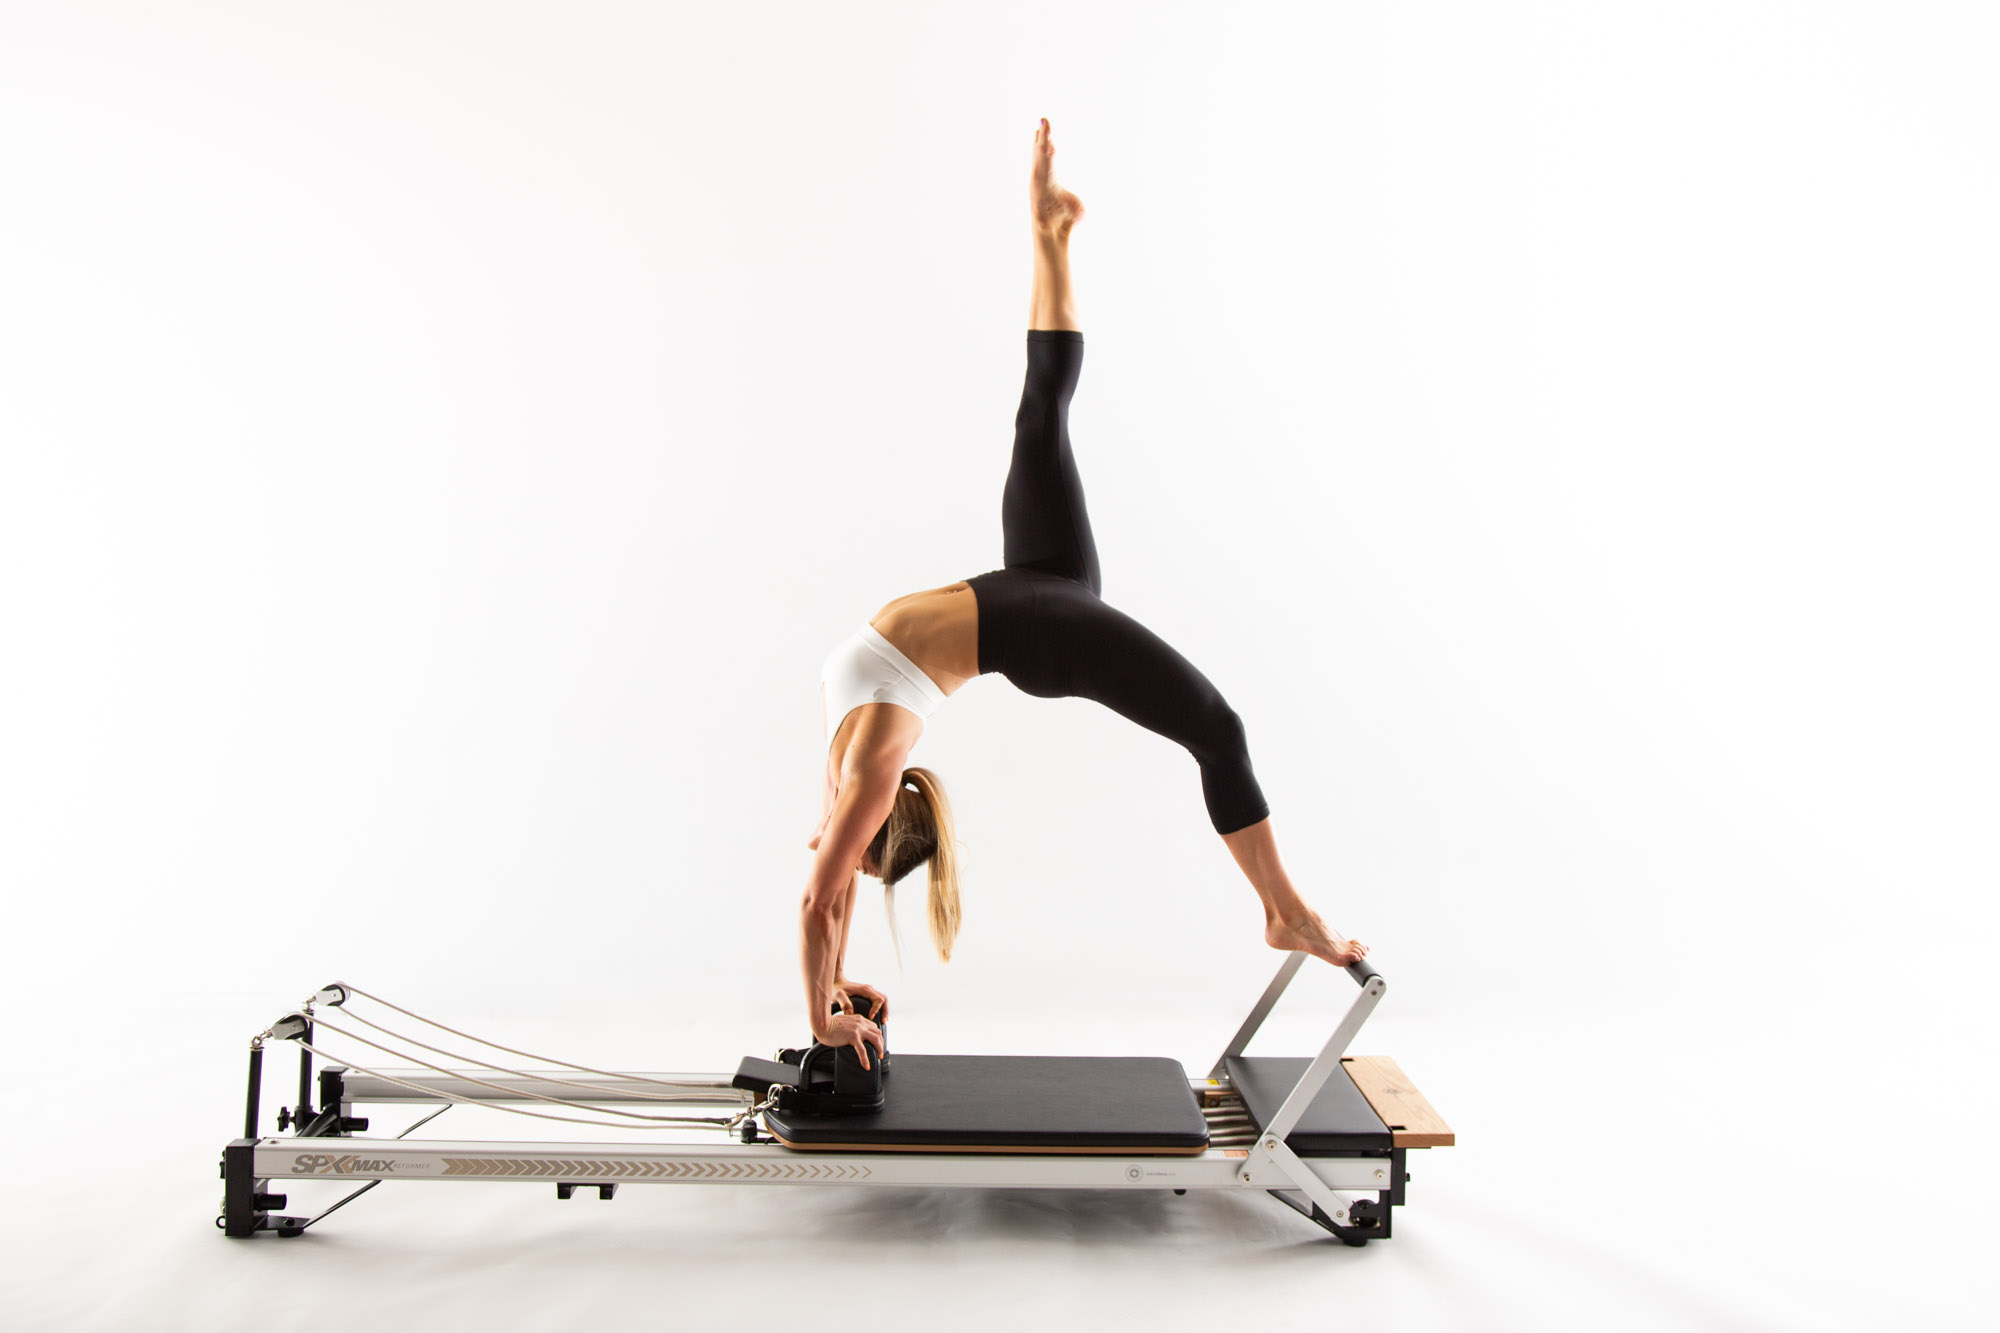 Pilates vs. Yoga: What Is the Difference? - GoodRx